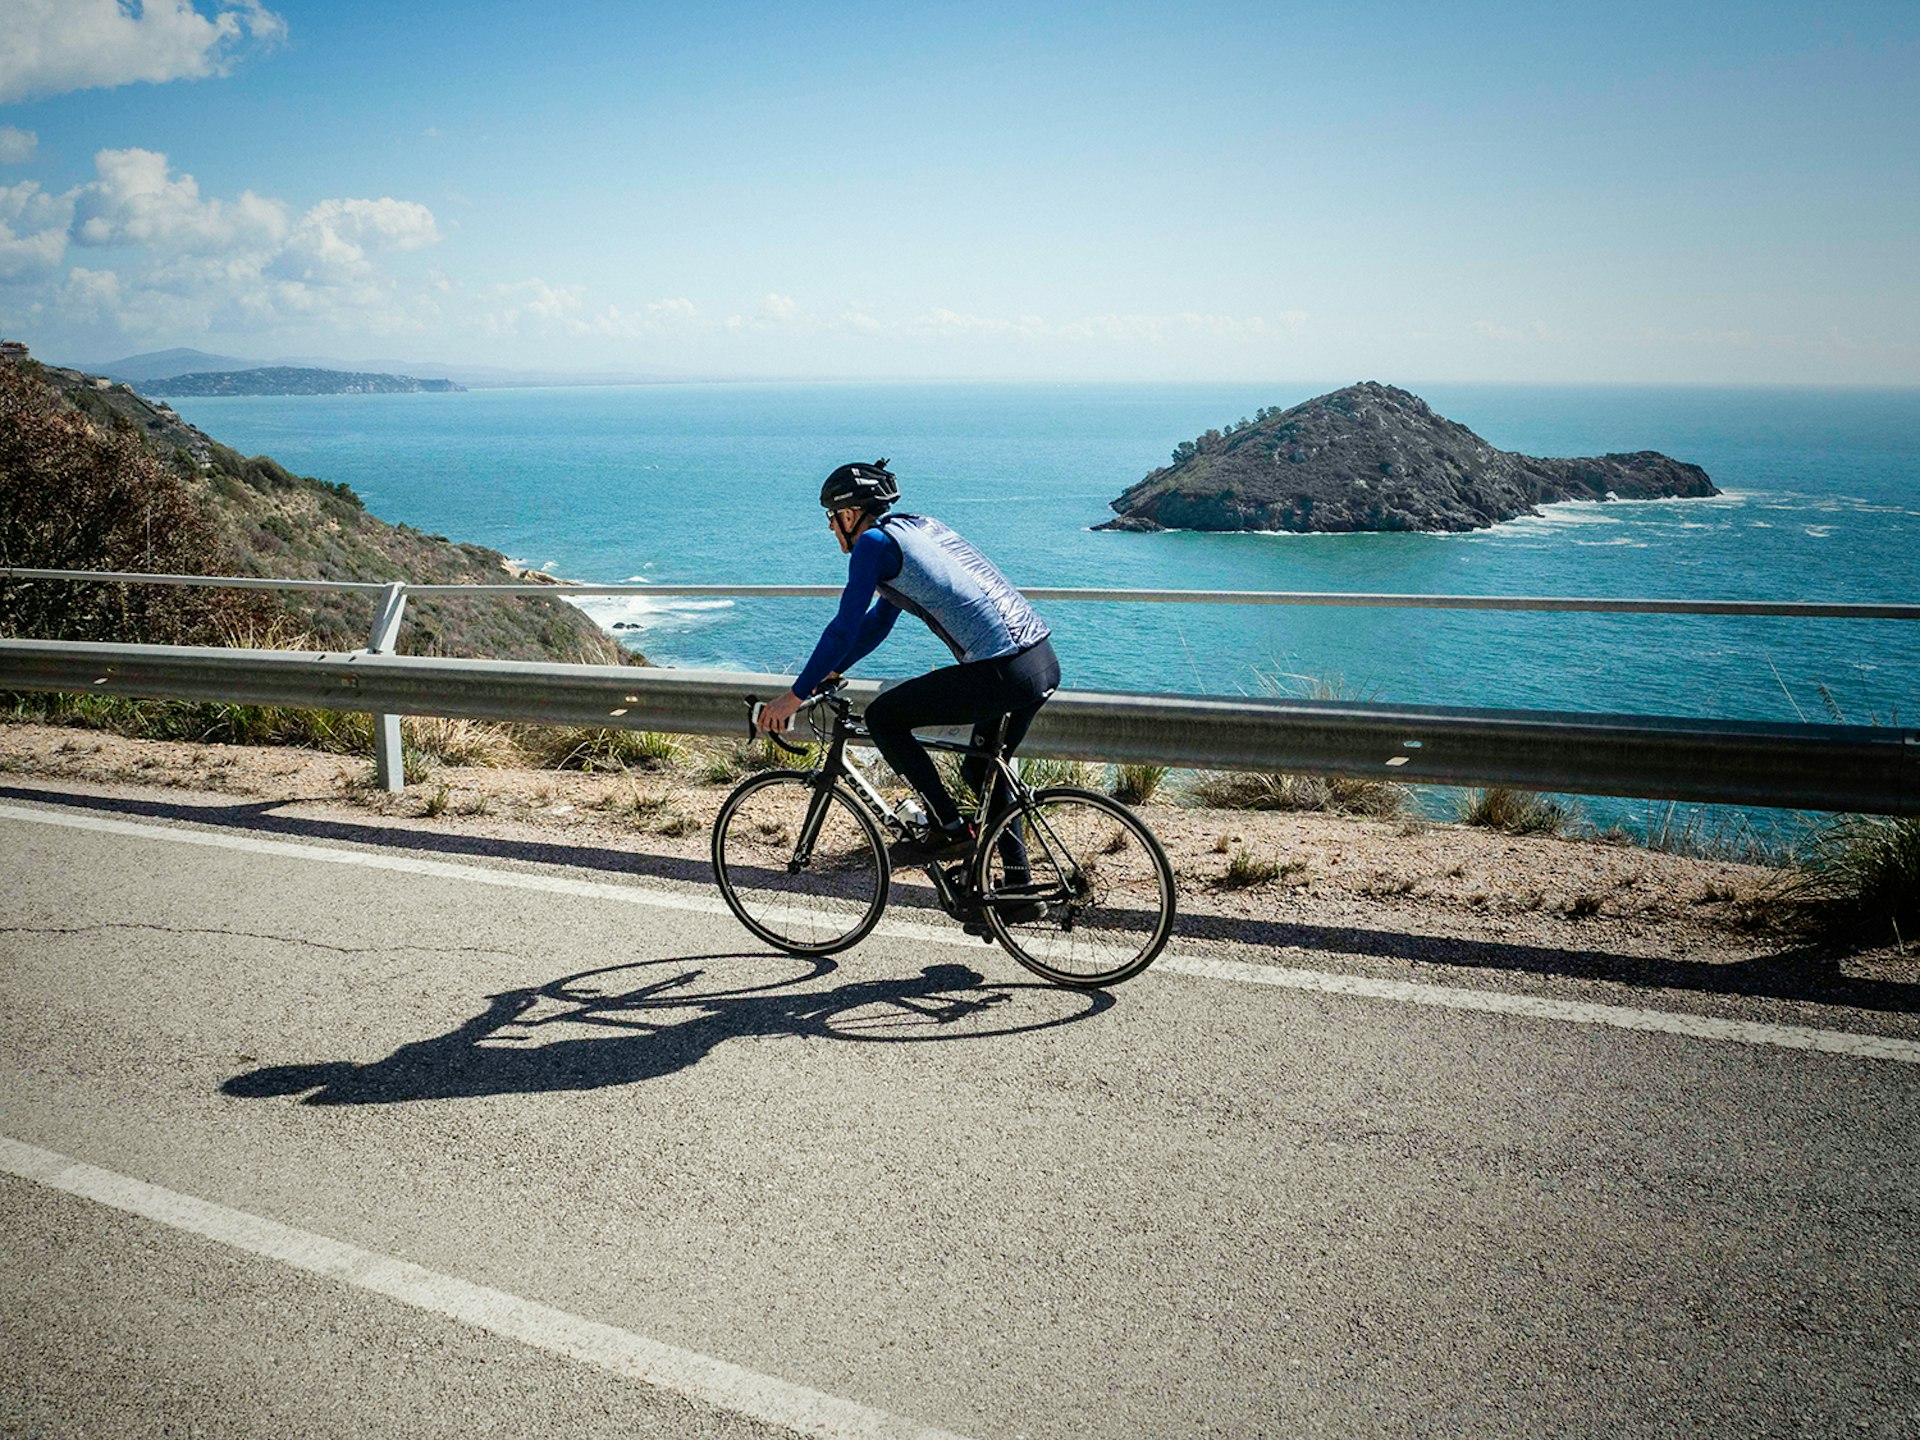 Writer Matt Phillips cycles down the road, which sits on the edge of a cliff - behind the barriers sits the Mediterranean and the forested islet of L'isolotto © Paolo Ciaberta